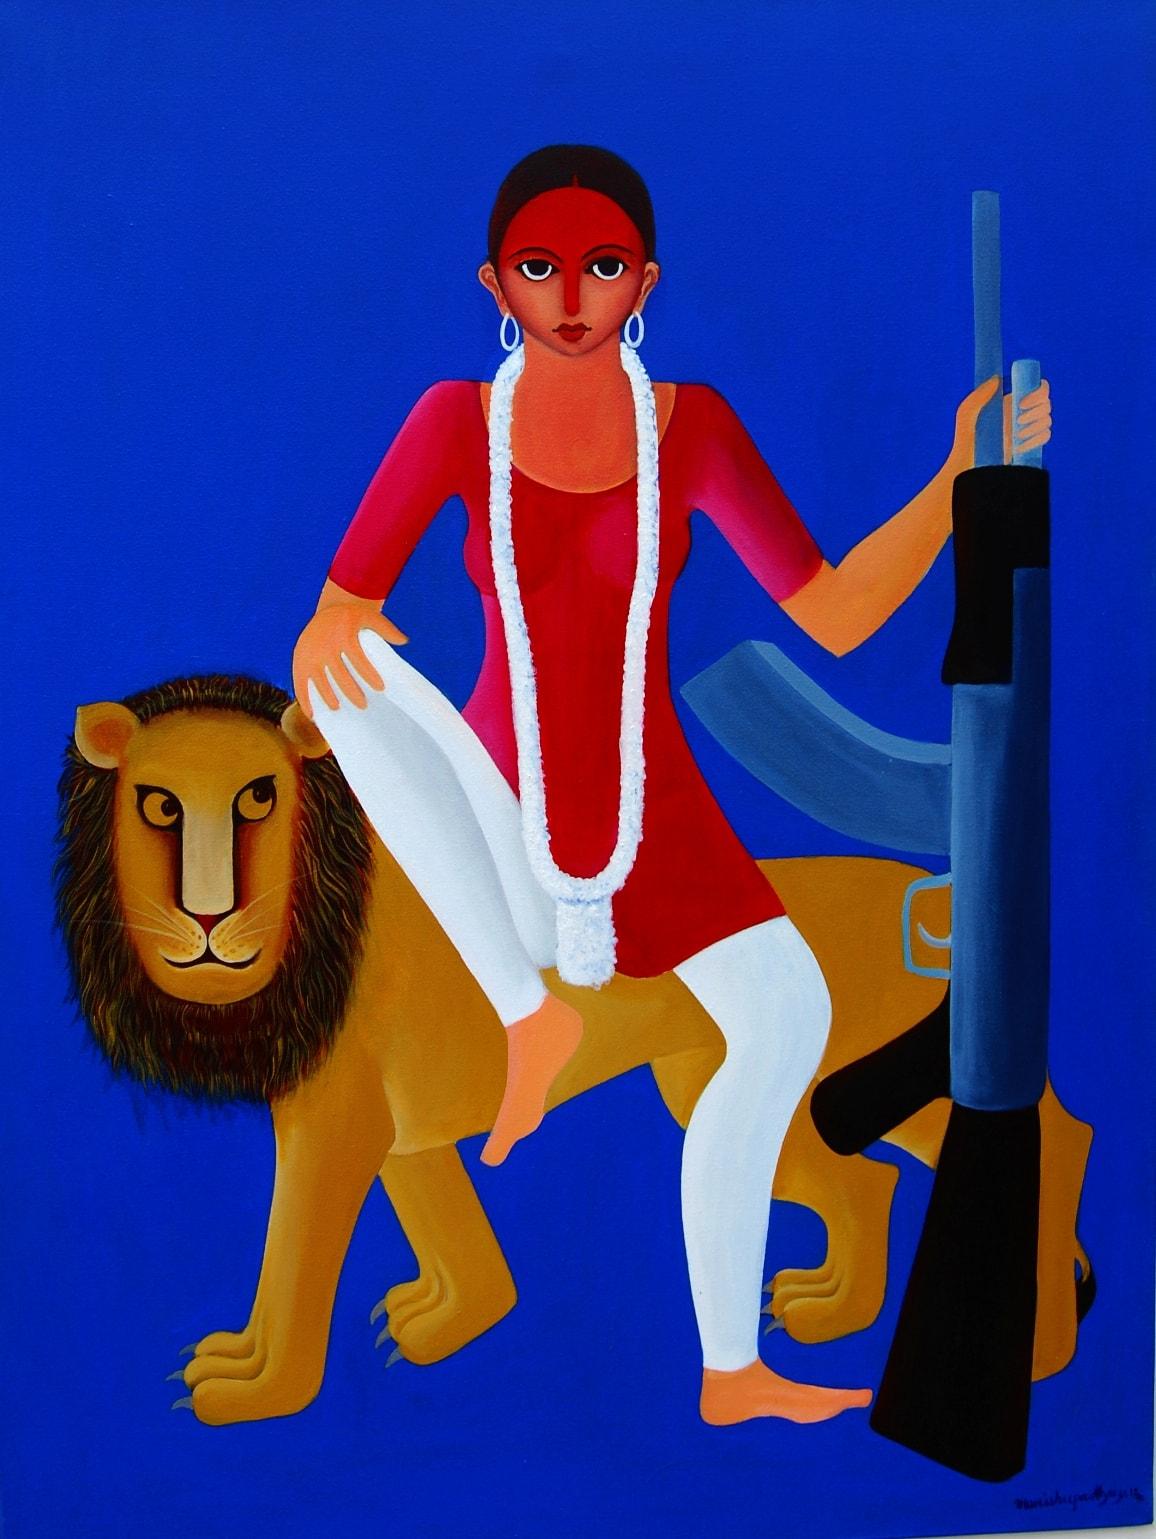 Manish Upadhyay Figurative Painting - Durga-2, Acrylic on Canvas, Blue, Red, Yellow by Contemporary Artist "In Stock"